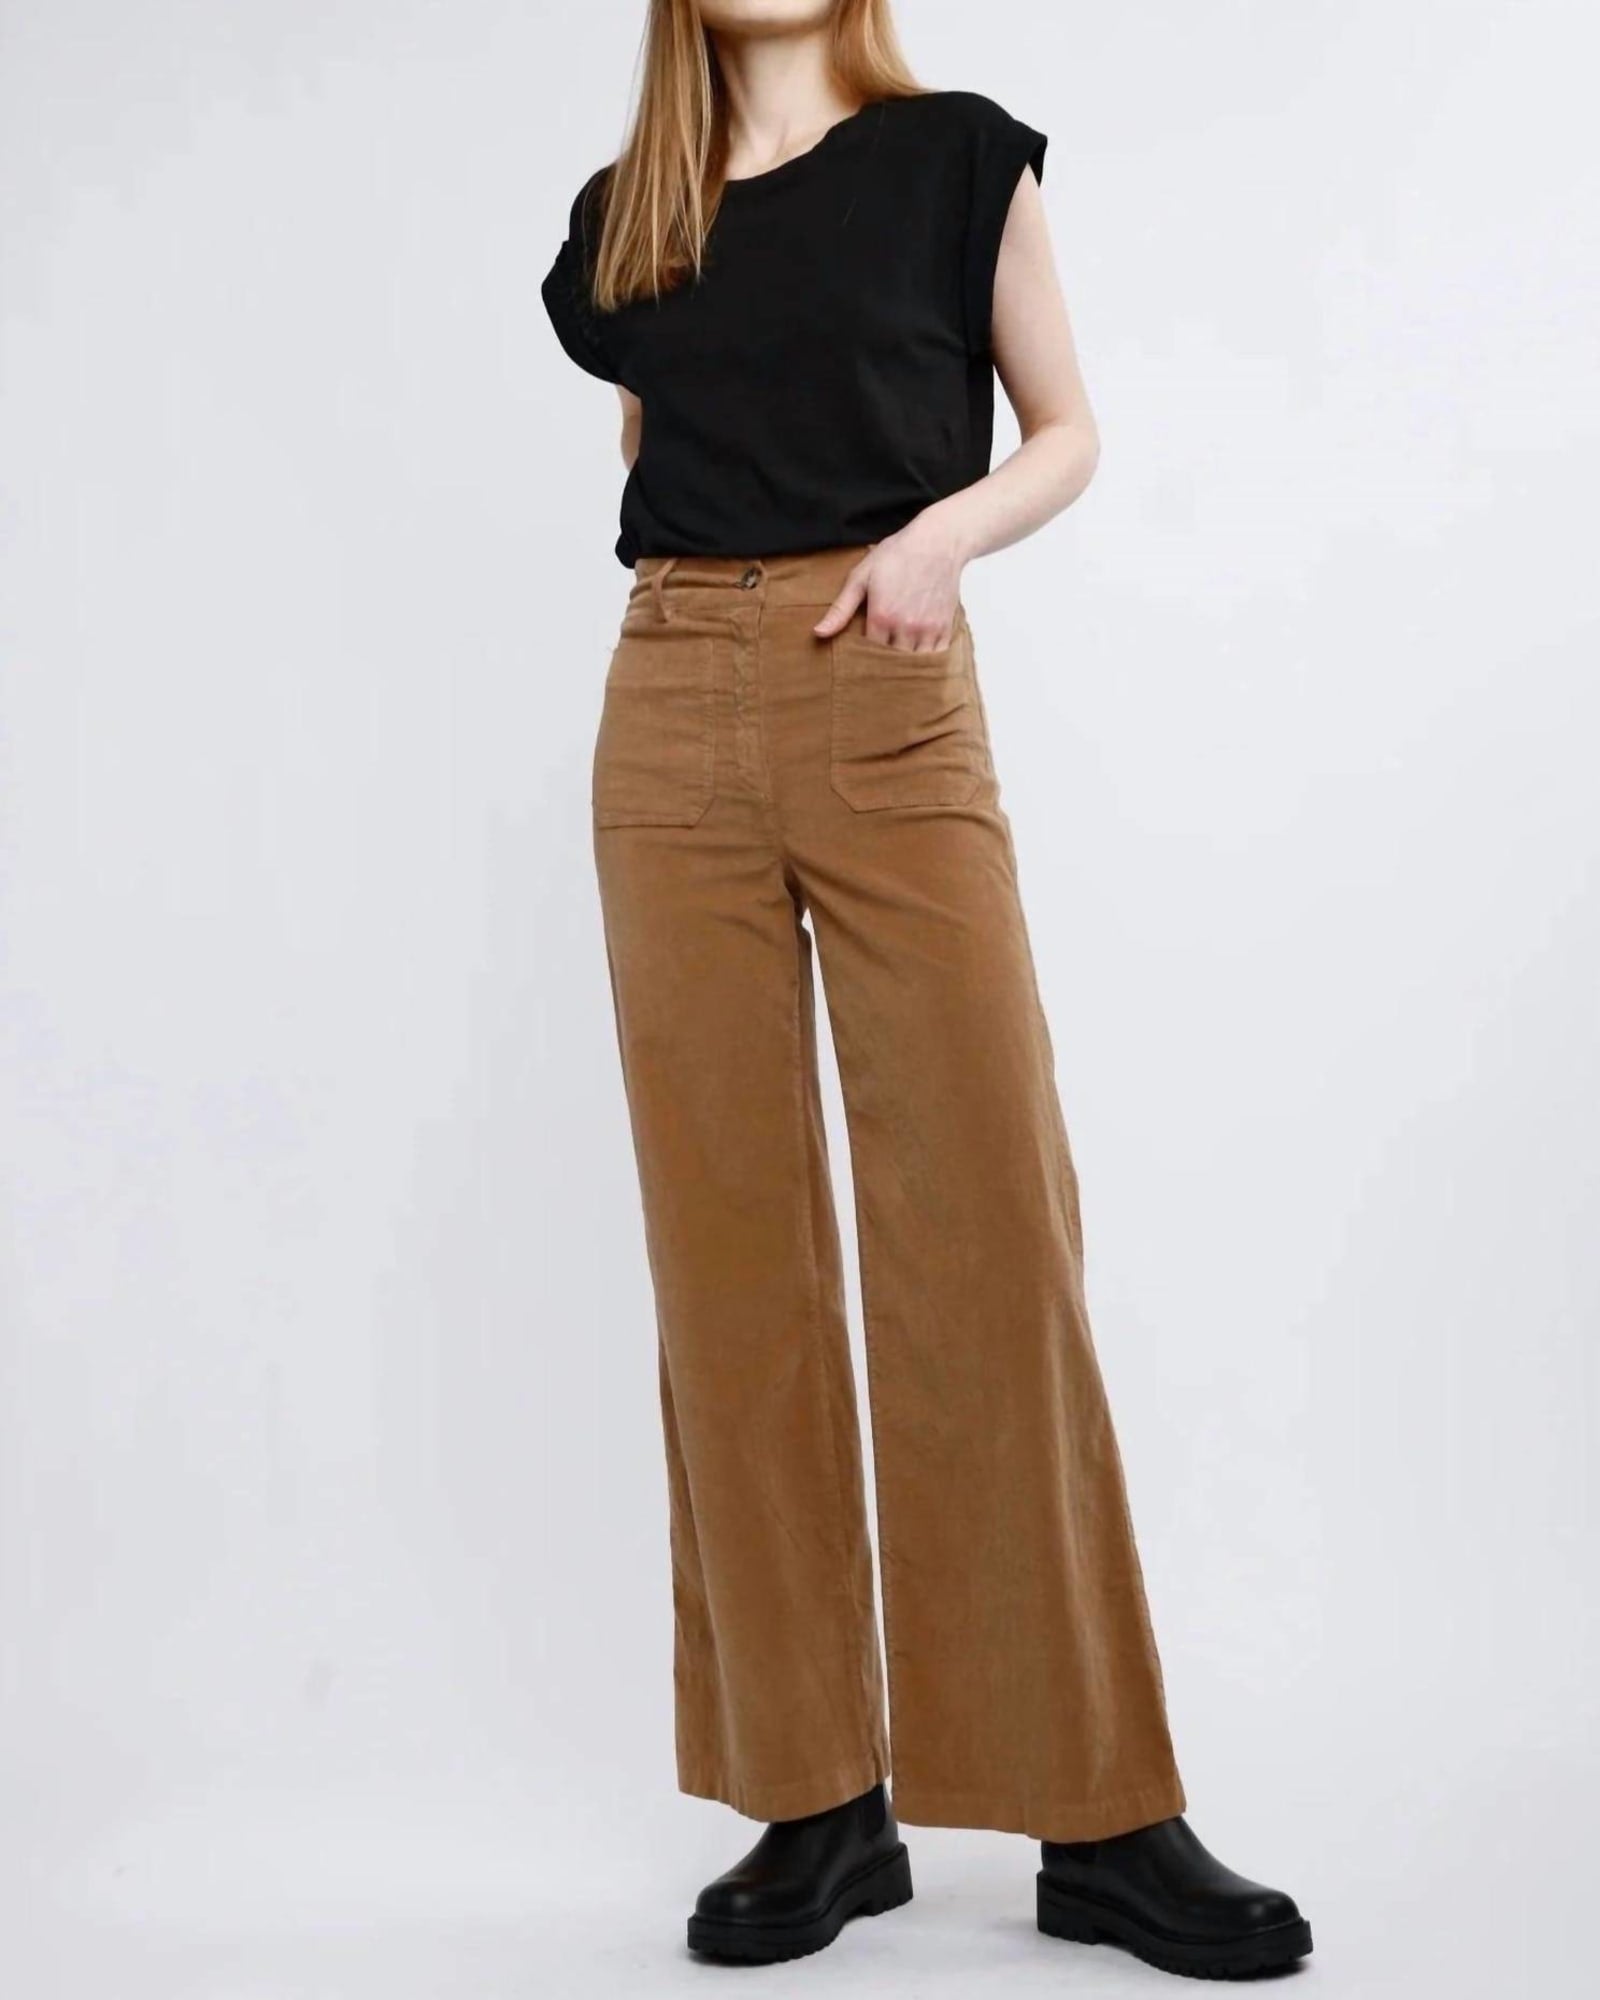 Everly Front Pocket Pant In Camel | Camel